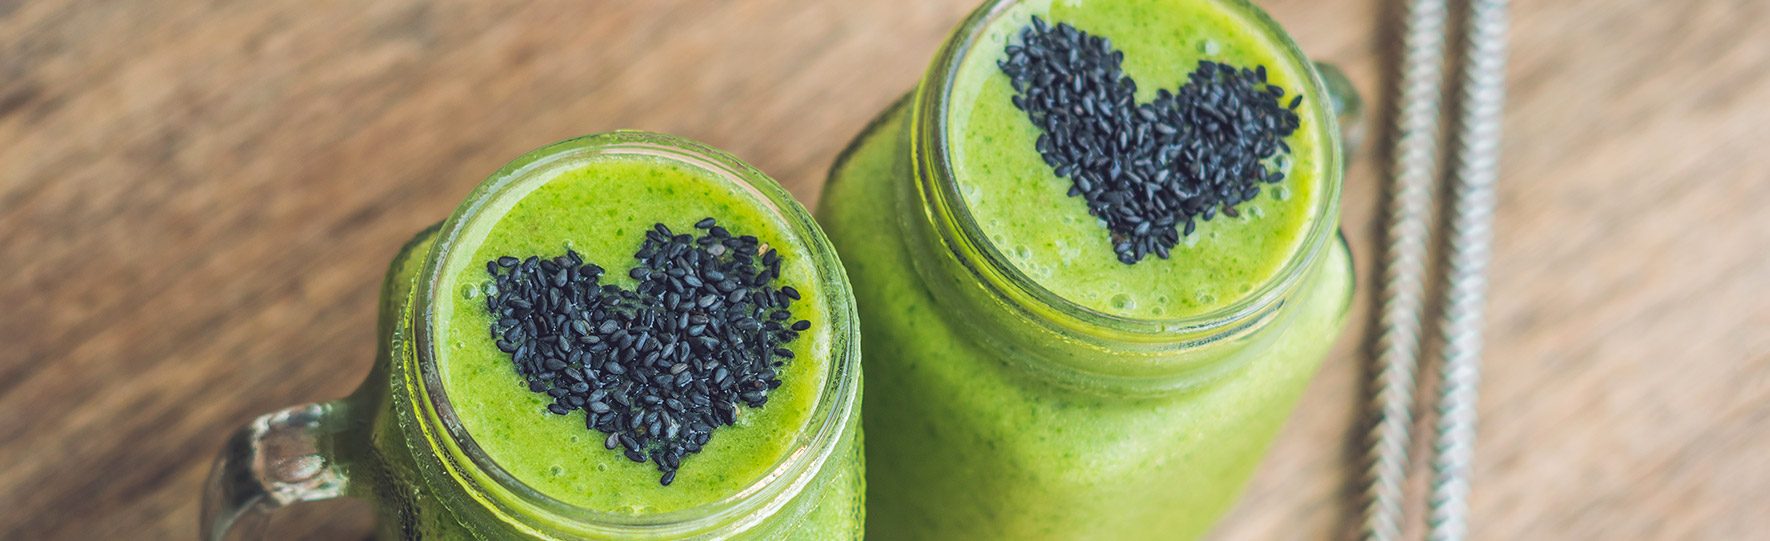 Hormone Balance smoothy recipes - The Form Practice